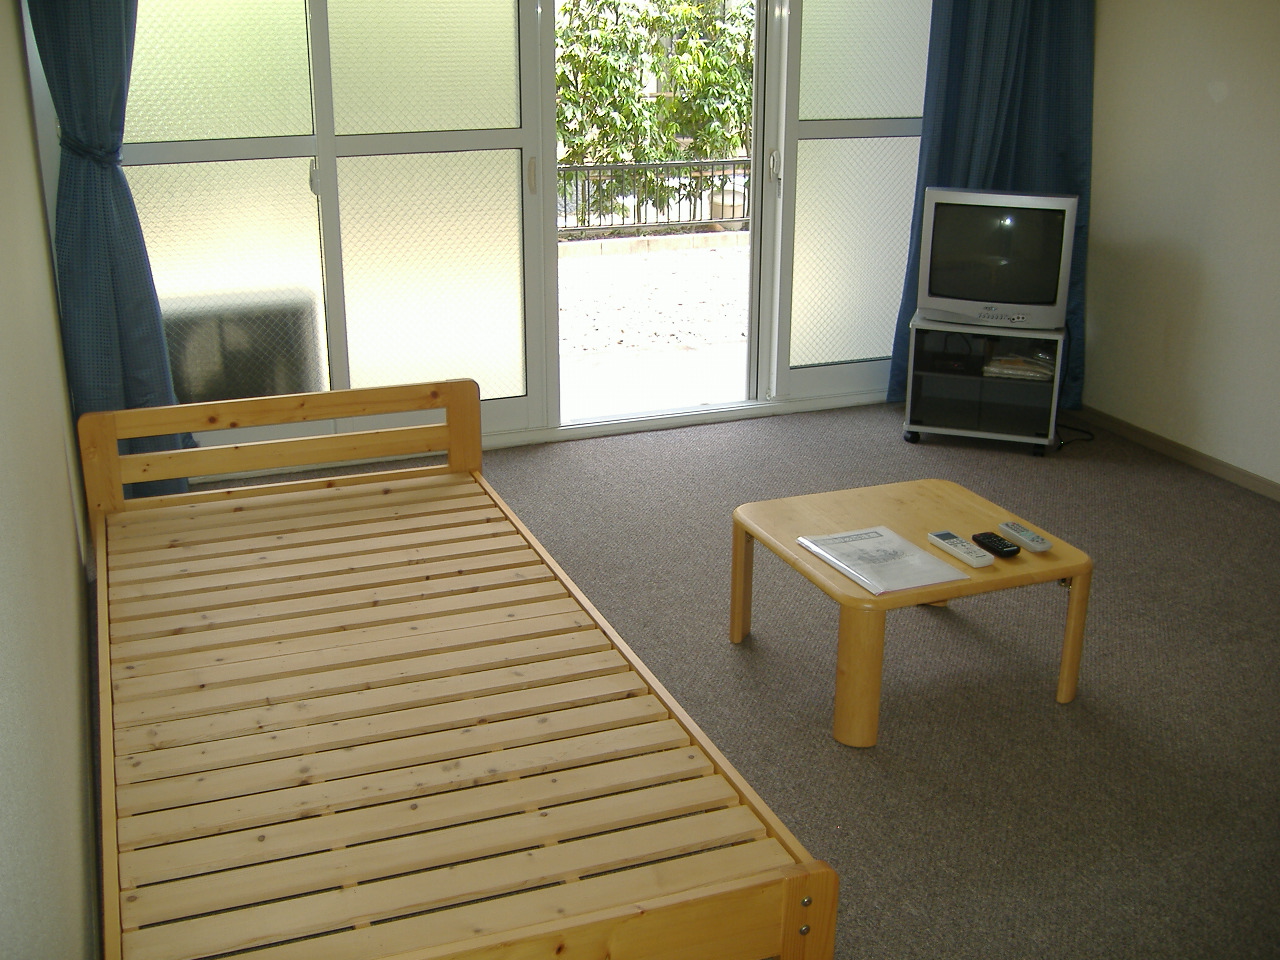 Living and room. Bed ・ With table!